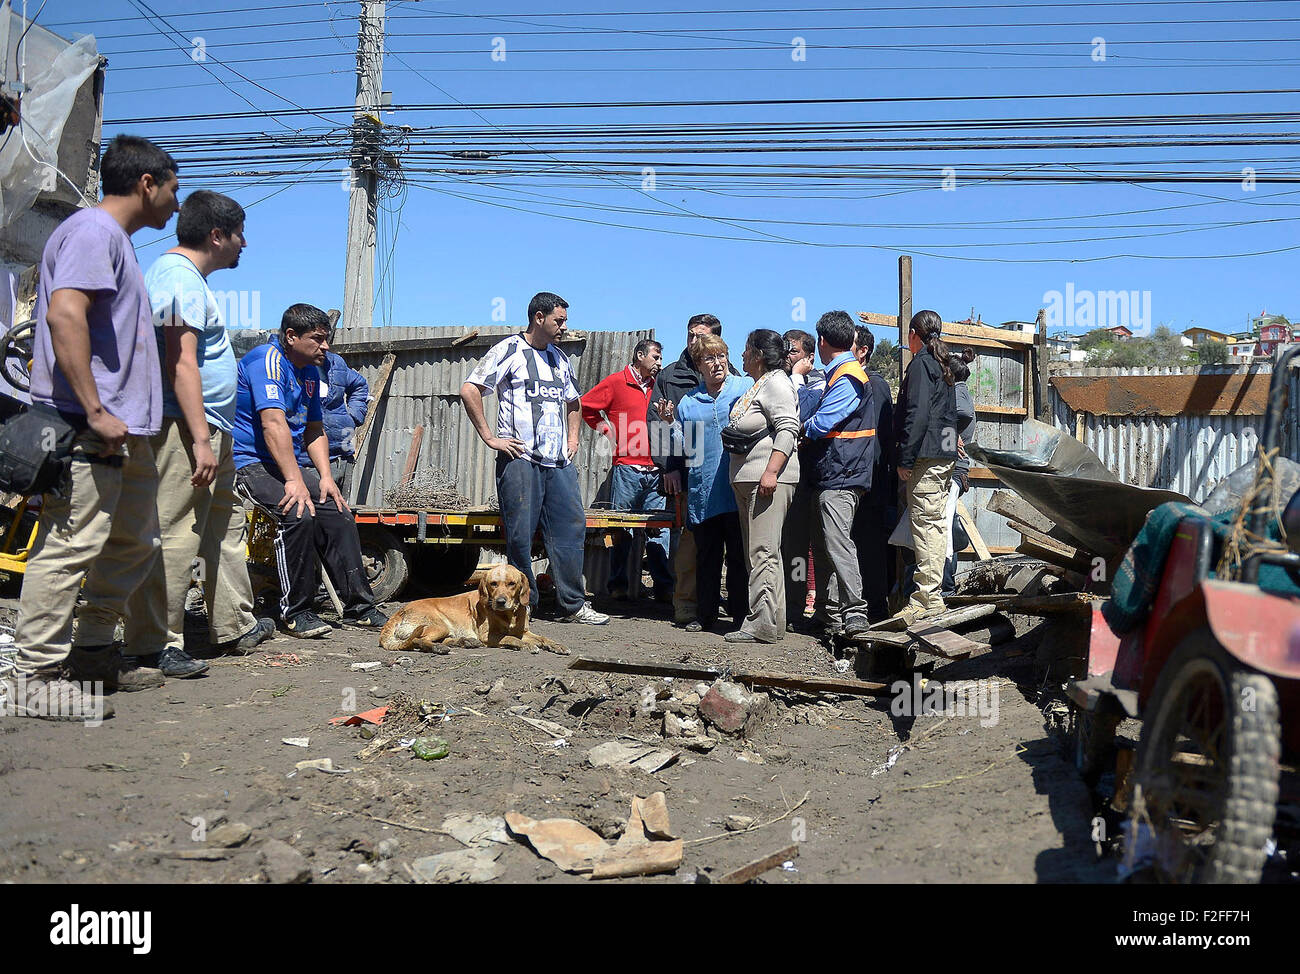 Coquimbo, Chile. 17th Sep, 2015. Image provided by Chile's Presidency shows Chilean President Michelle Bachelet (4th R, front) inspecting the coastal area in Coquimbo City, Chile, Sept. 17, 2015. The coastal area in Coquimbo City was damaged by the tsunami following the recent earthquak. The earthquake has so far left ten people dead, according to the Chile's National Office for Emergencies of the Ministry of Interior and Public Security (ONEMI), in addition to the evacuation of a million people. Credit:  Sebastian Rodriguez/Chile's Presidency/Xinhua/Alamy Live News Stock Photo